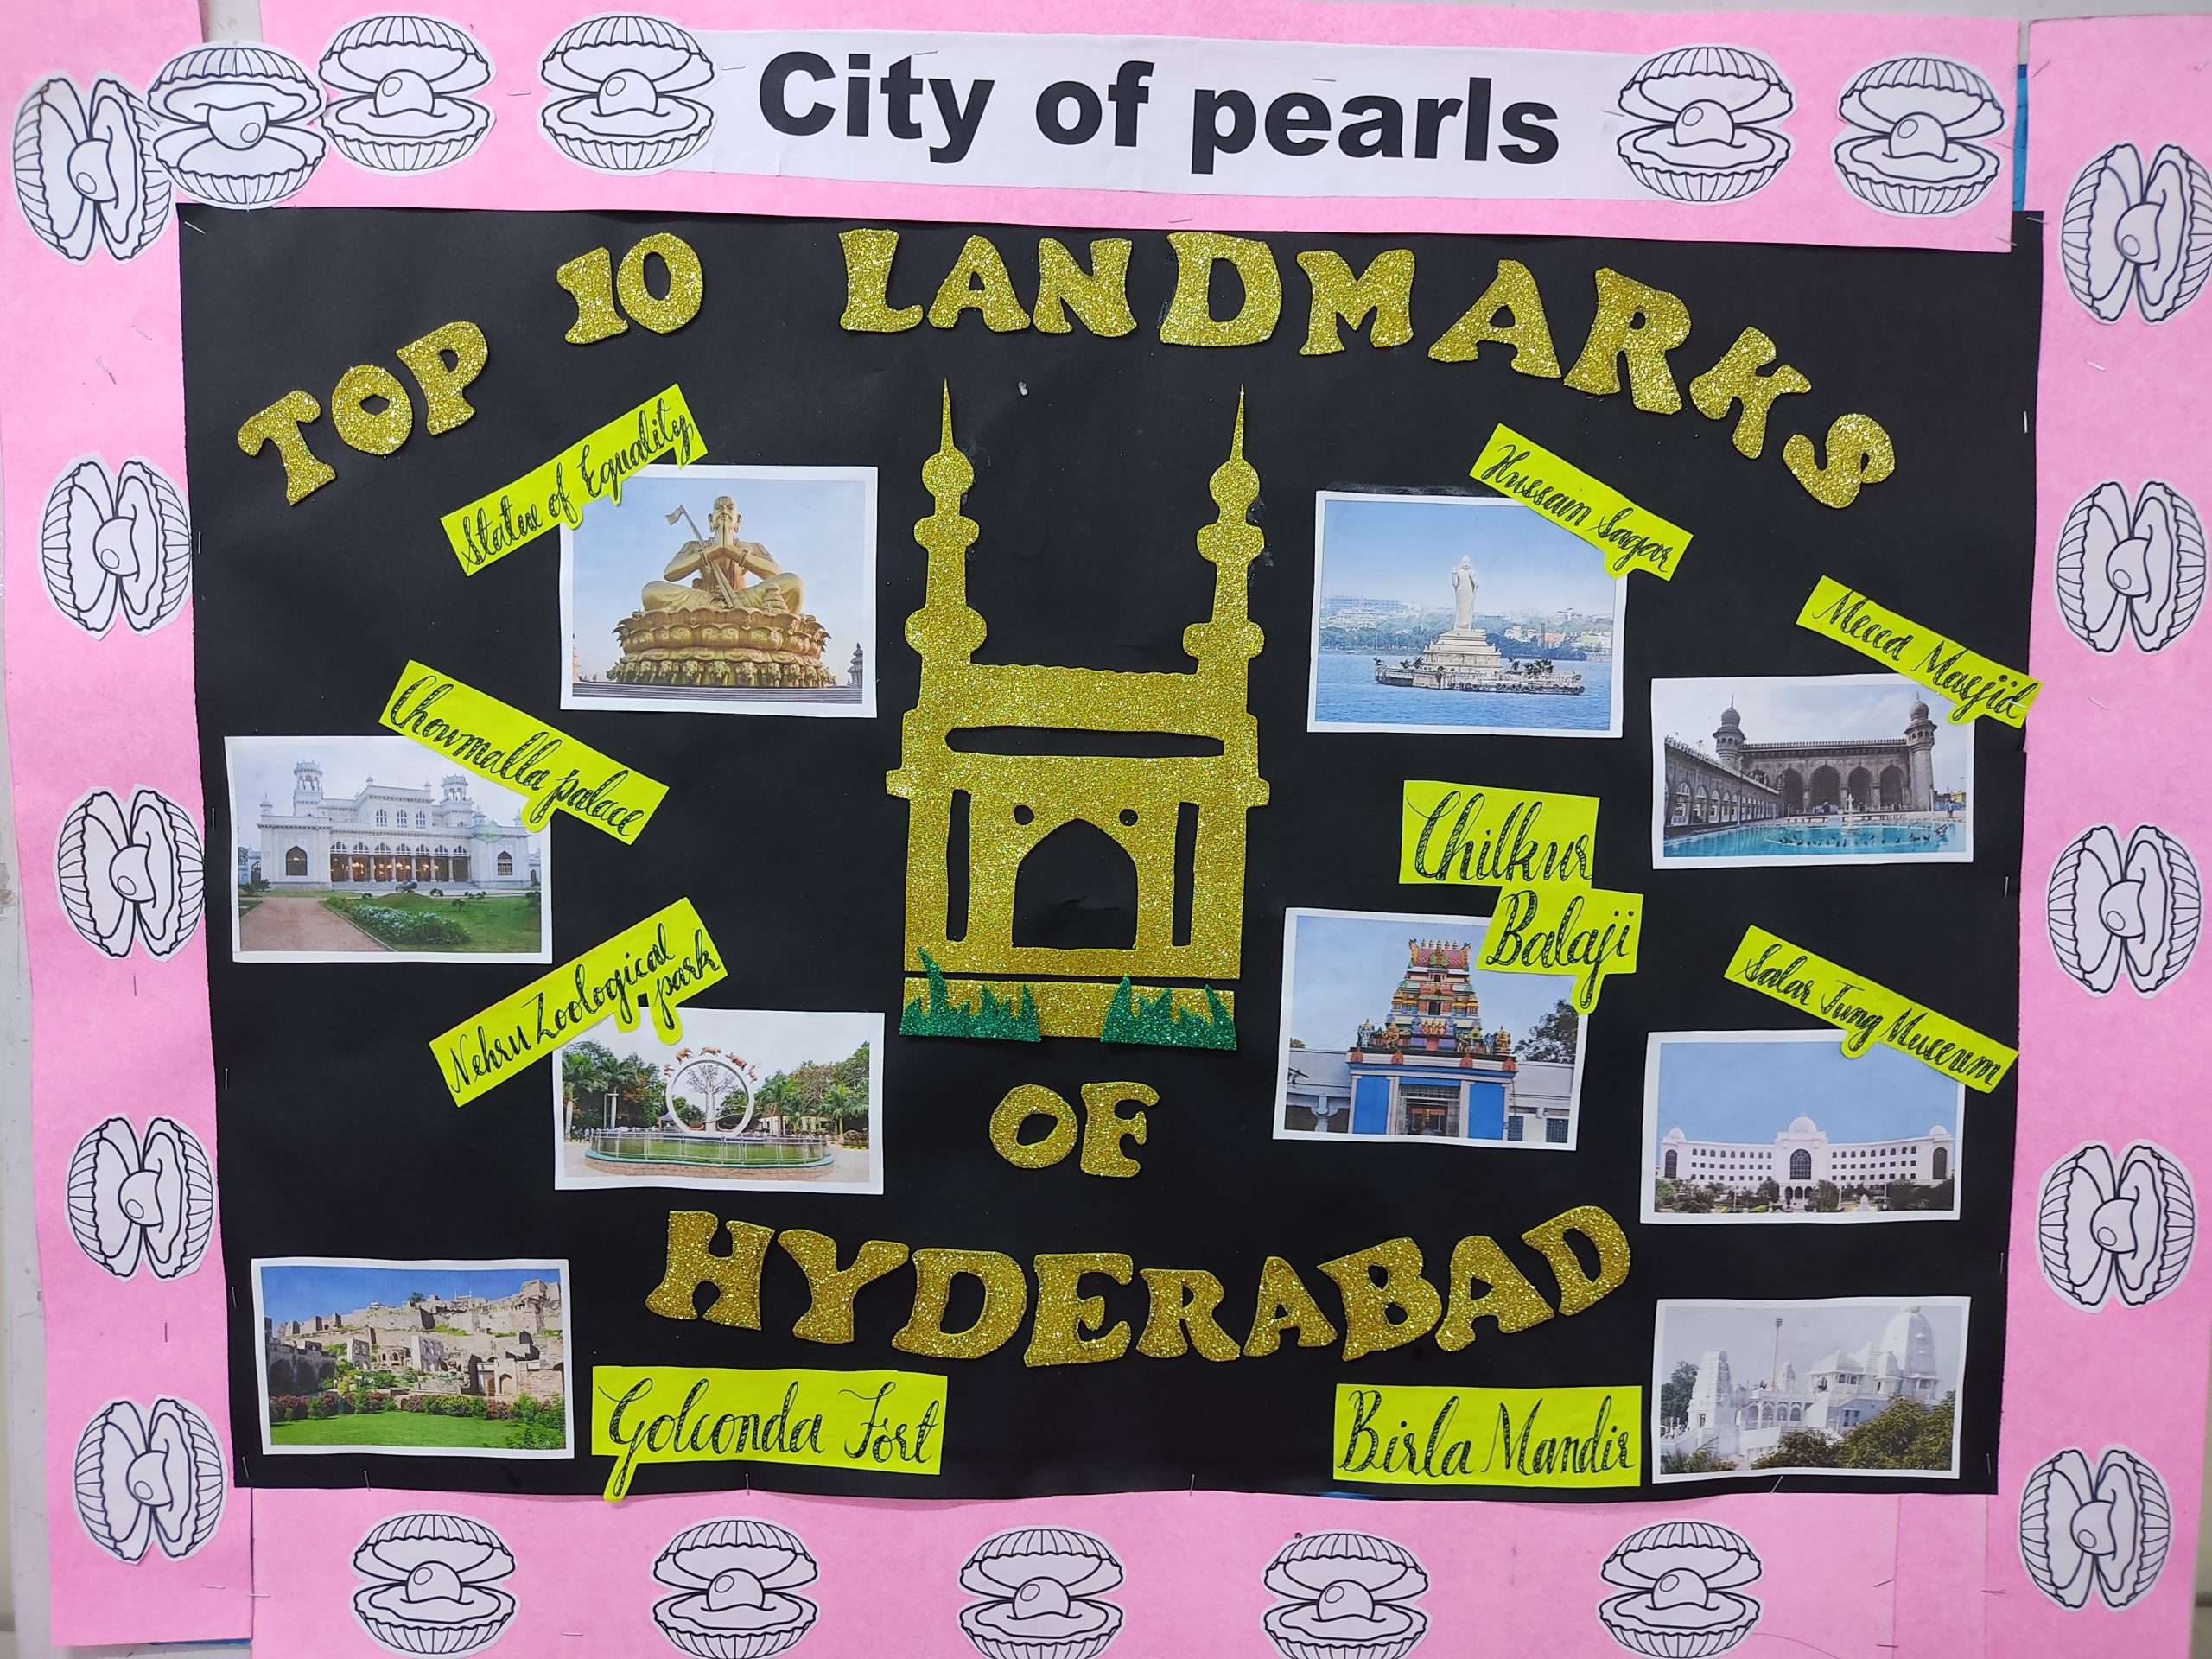 Grade 1C-Special Assembly on Top 10 landmarks of Hyderabad